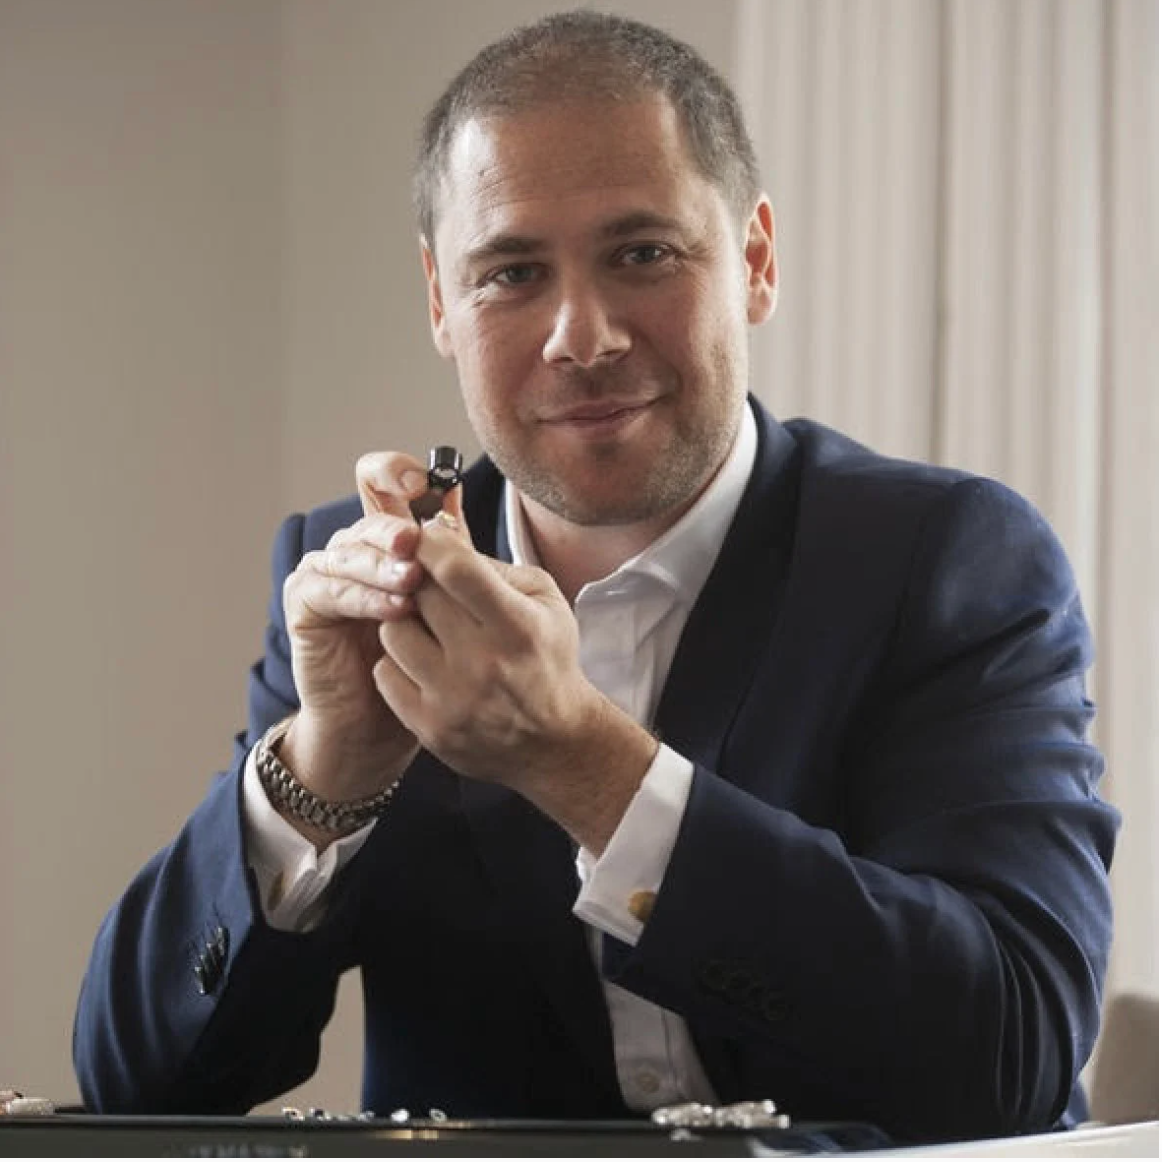 tobias-kormind-managing-director-of-77-diamonds-is-excited-about-the-new-discovery-77-diamonds-1659487951.png